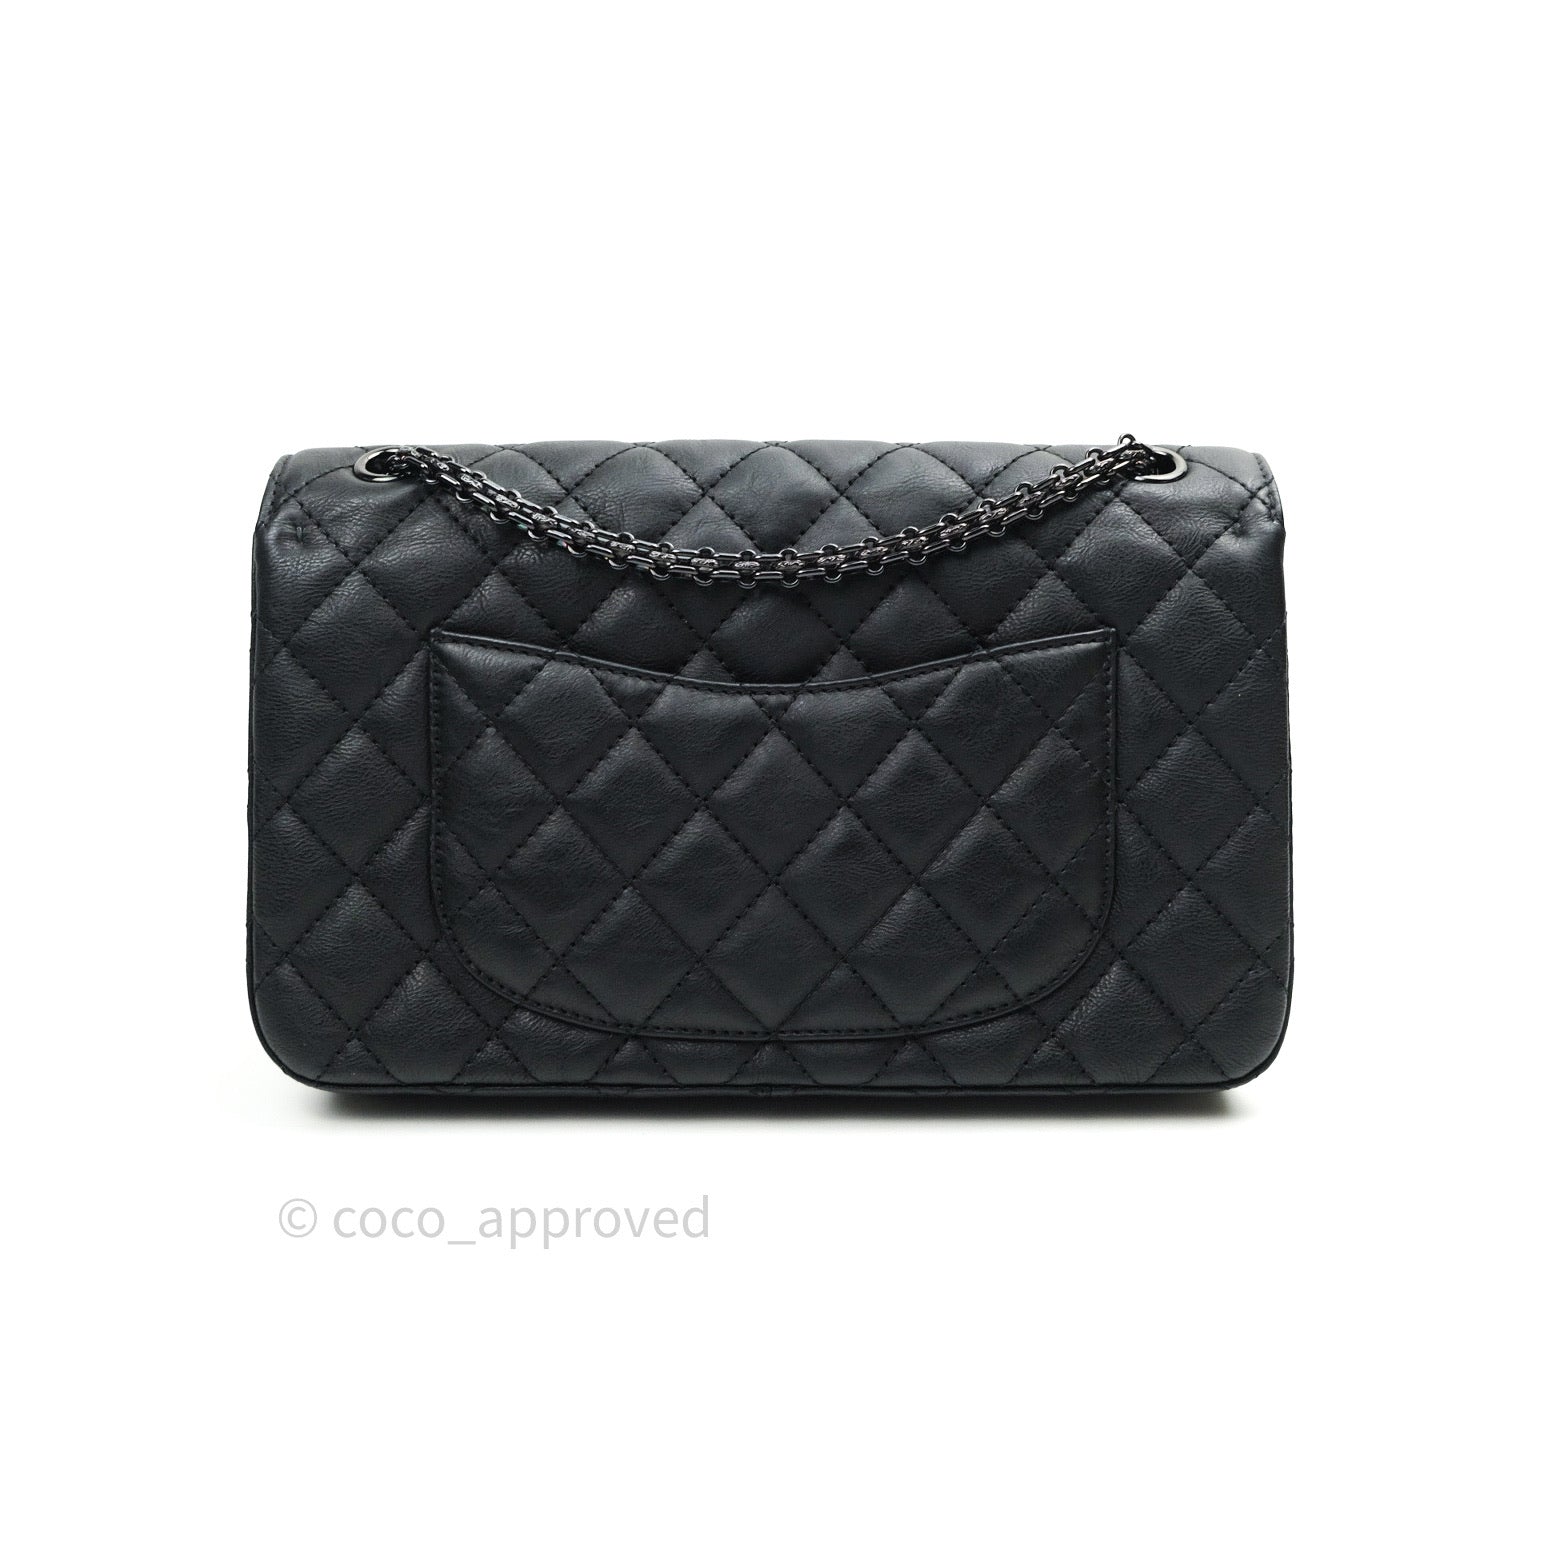 CHANEL Aged Calfskin Quilted 2.55 Reissue 226 Flap Black 1205493